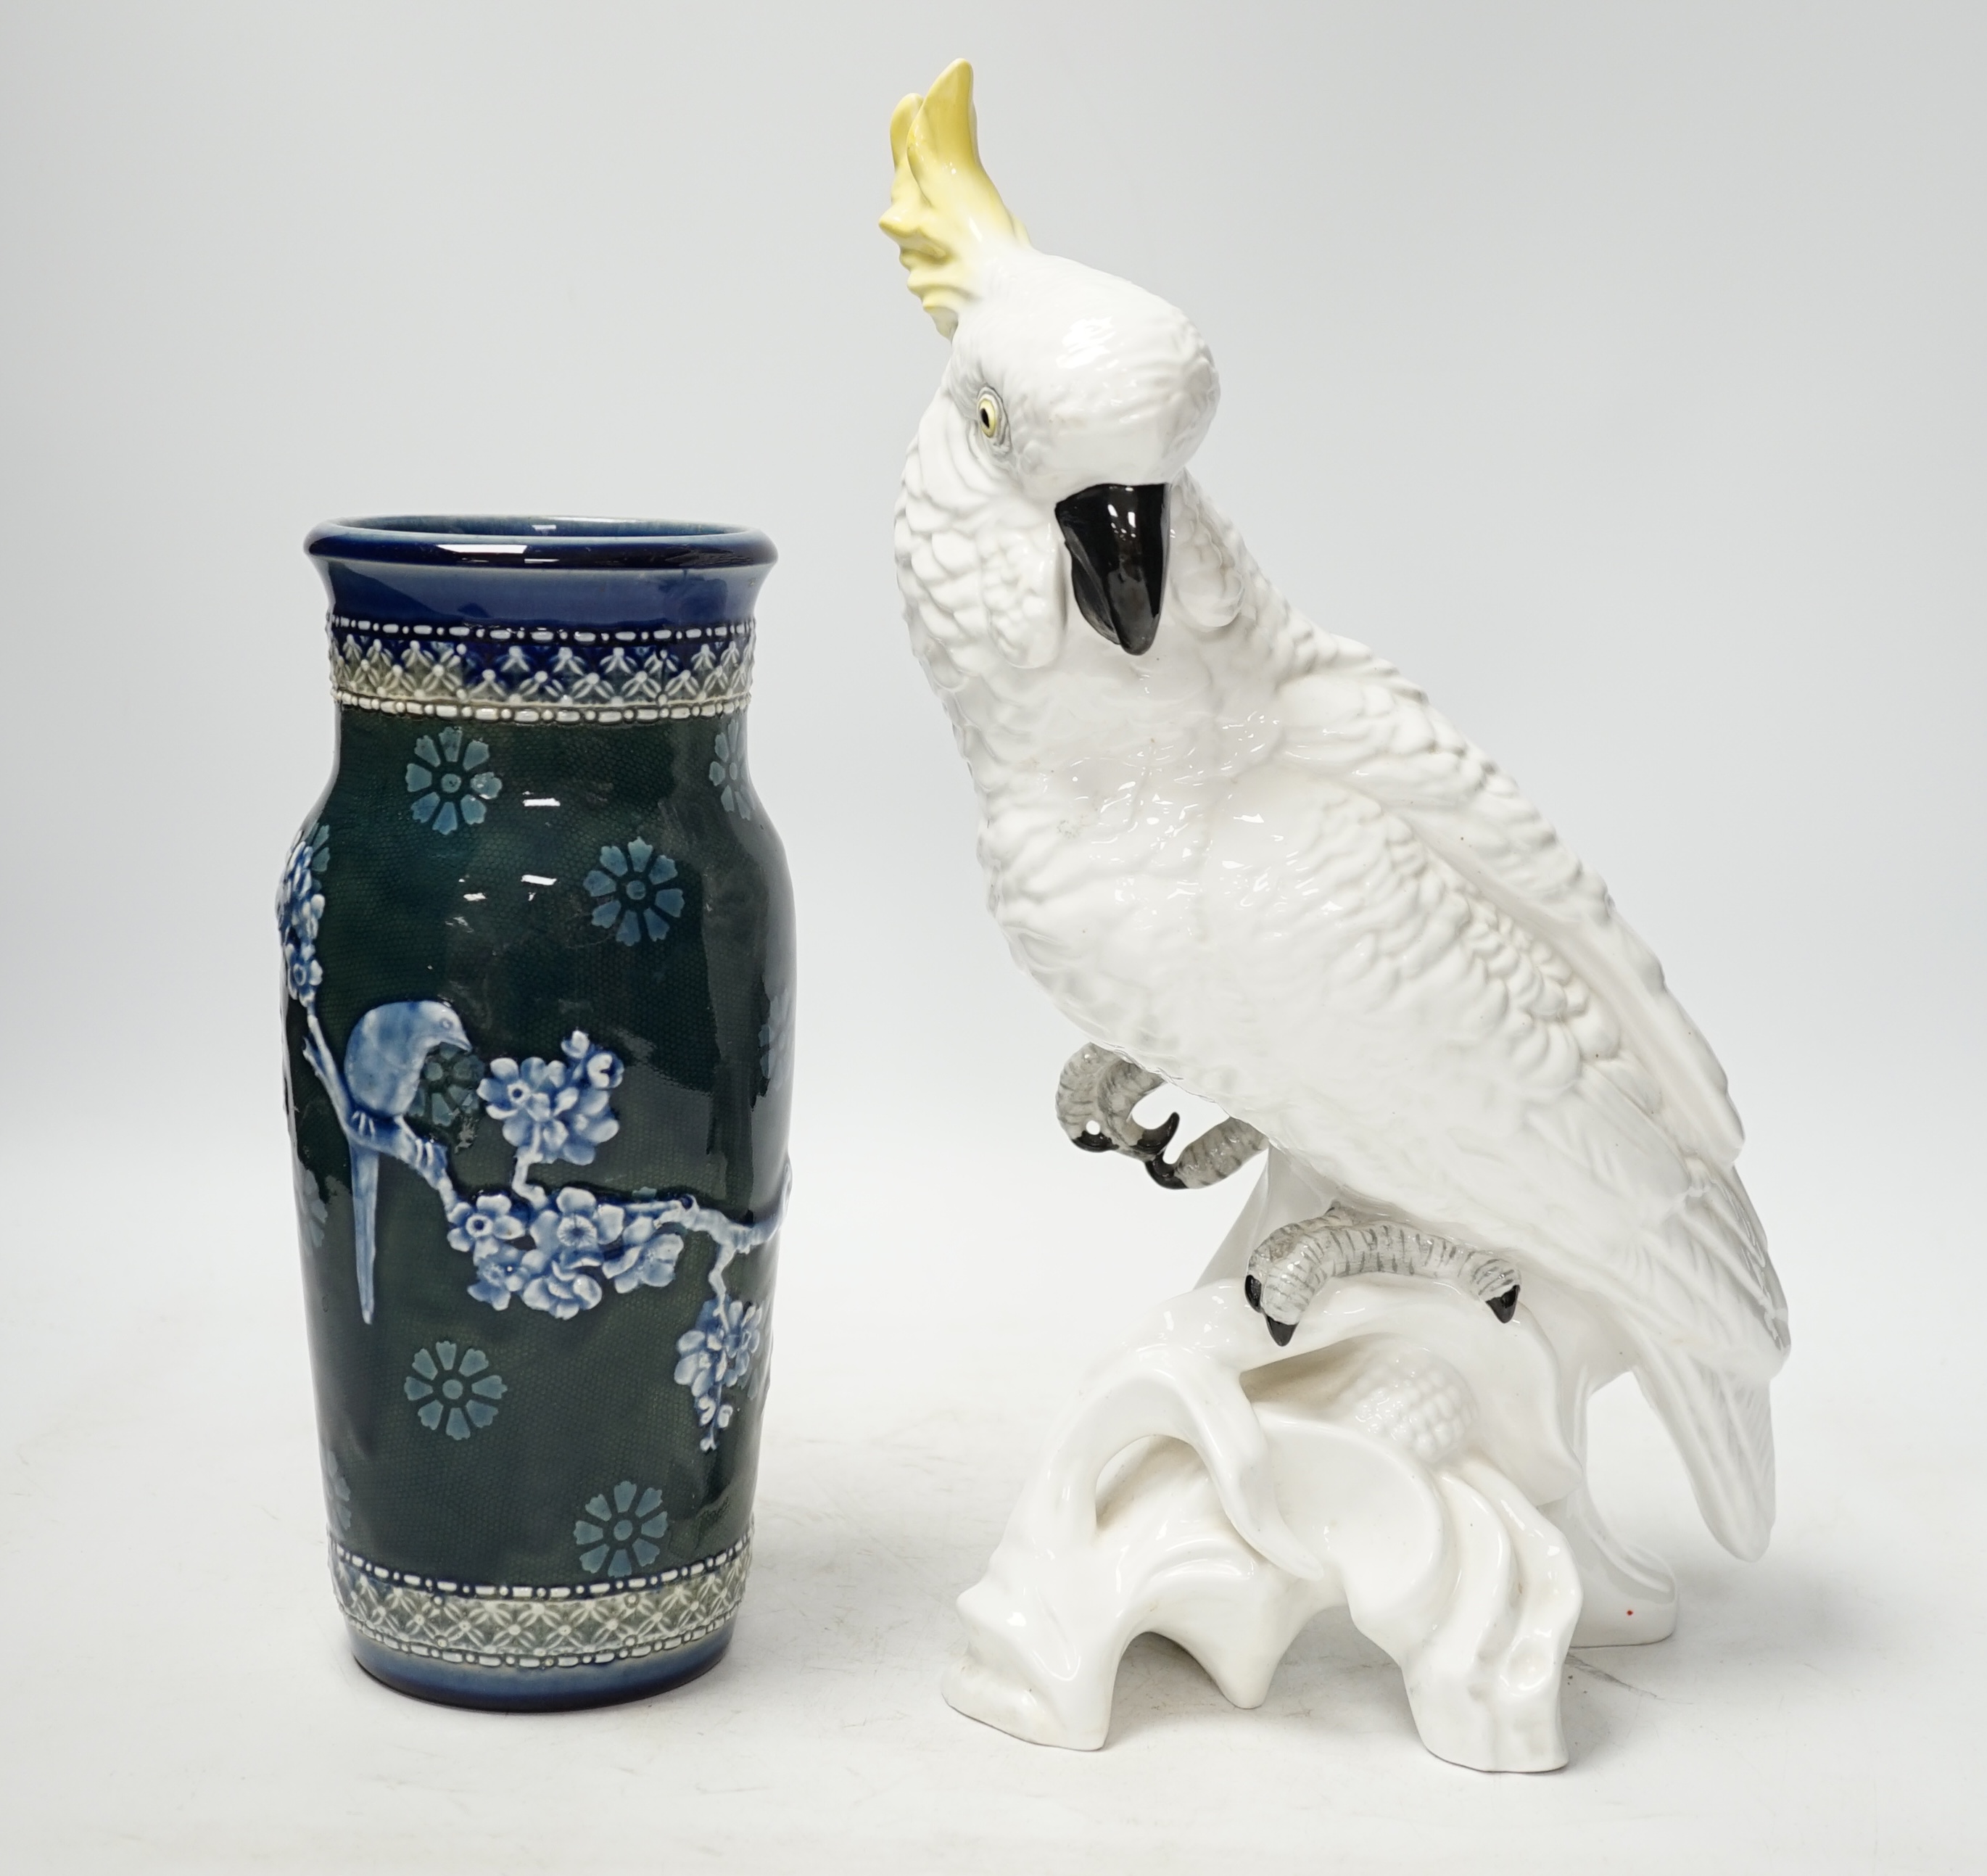 A Doulton and Slater’s patent stoneware vase and a Royal Staffordshire porcelain figure of a cockatoo, 33cm high. Condition - poor to fair condition, significant cracks to cockatoo